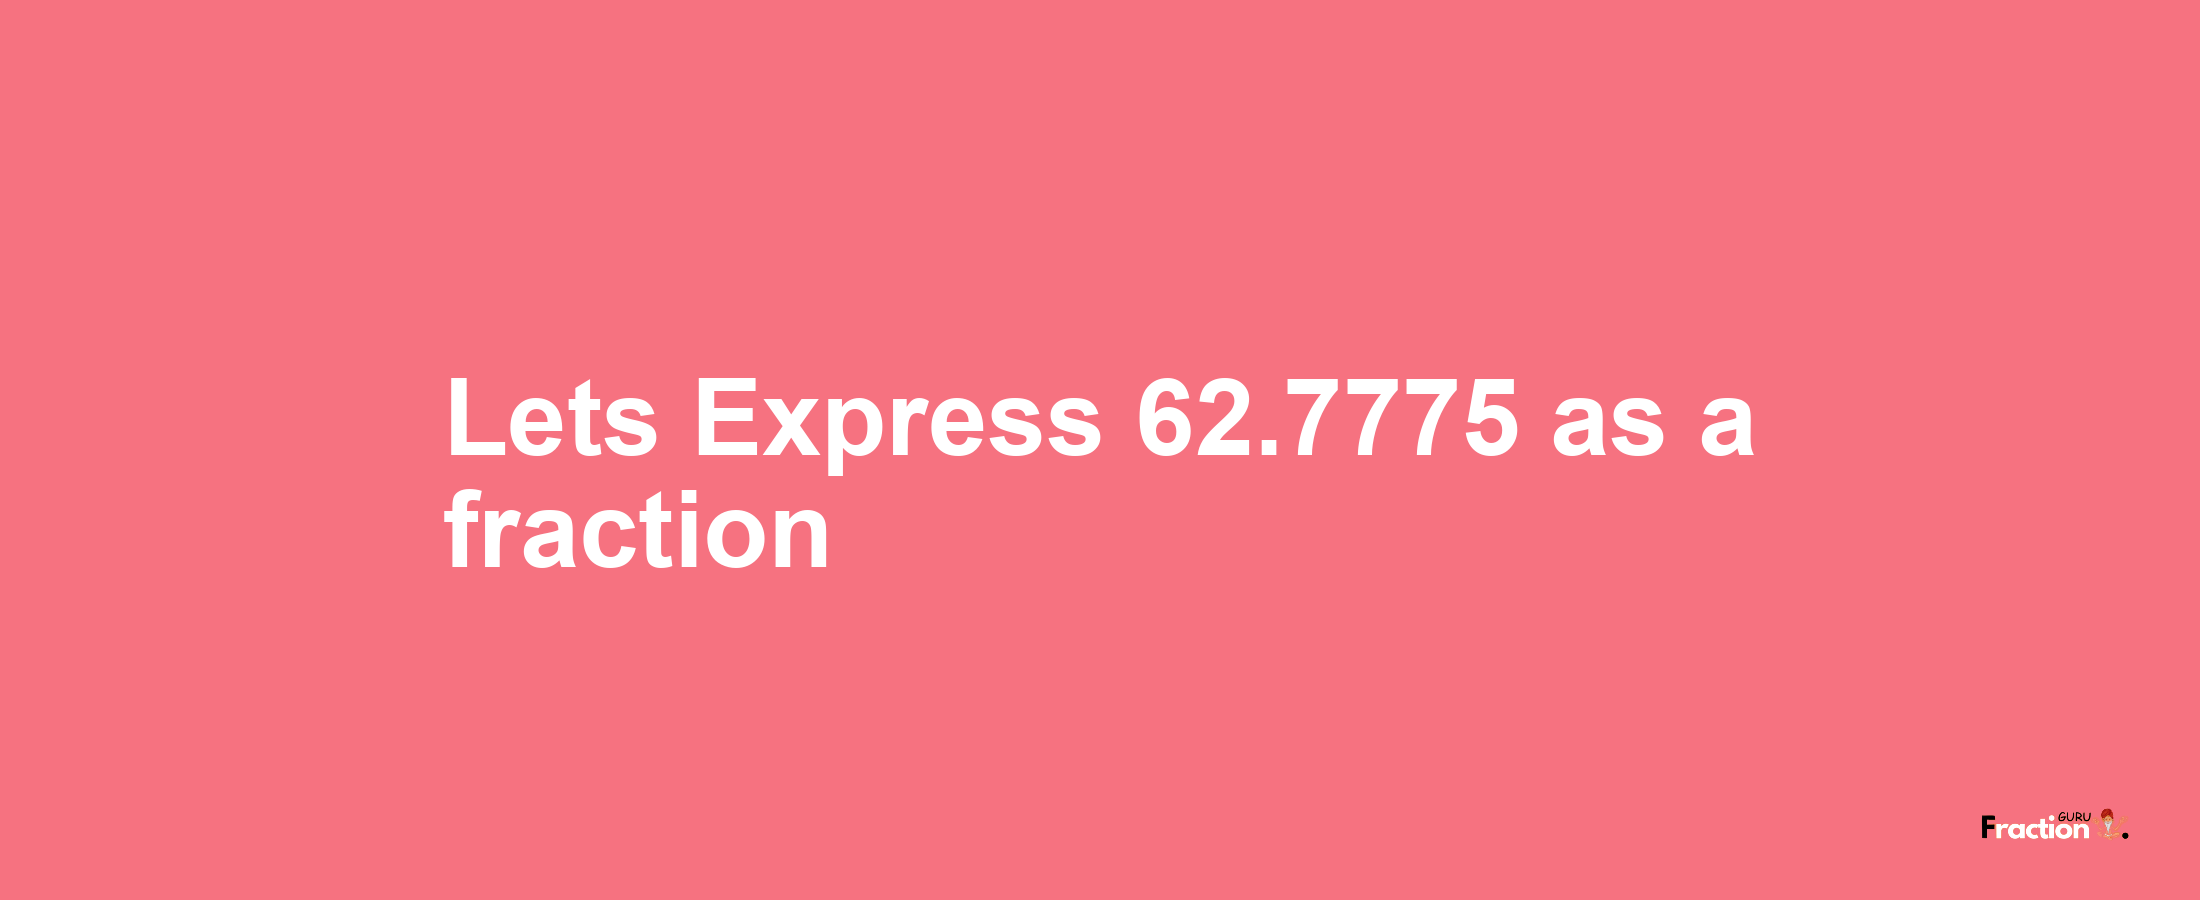 Lets Express 62.7775 as afraction